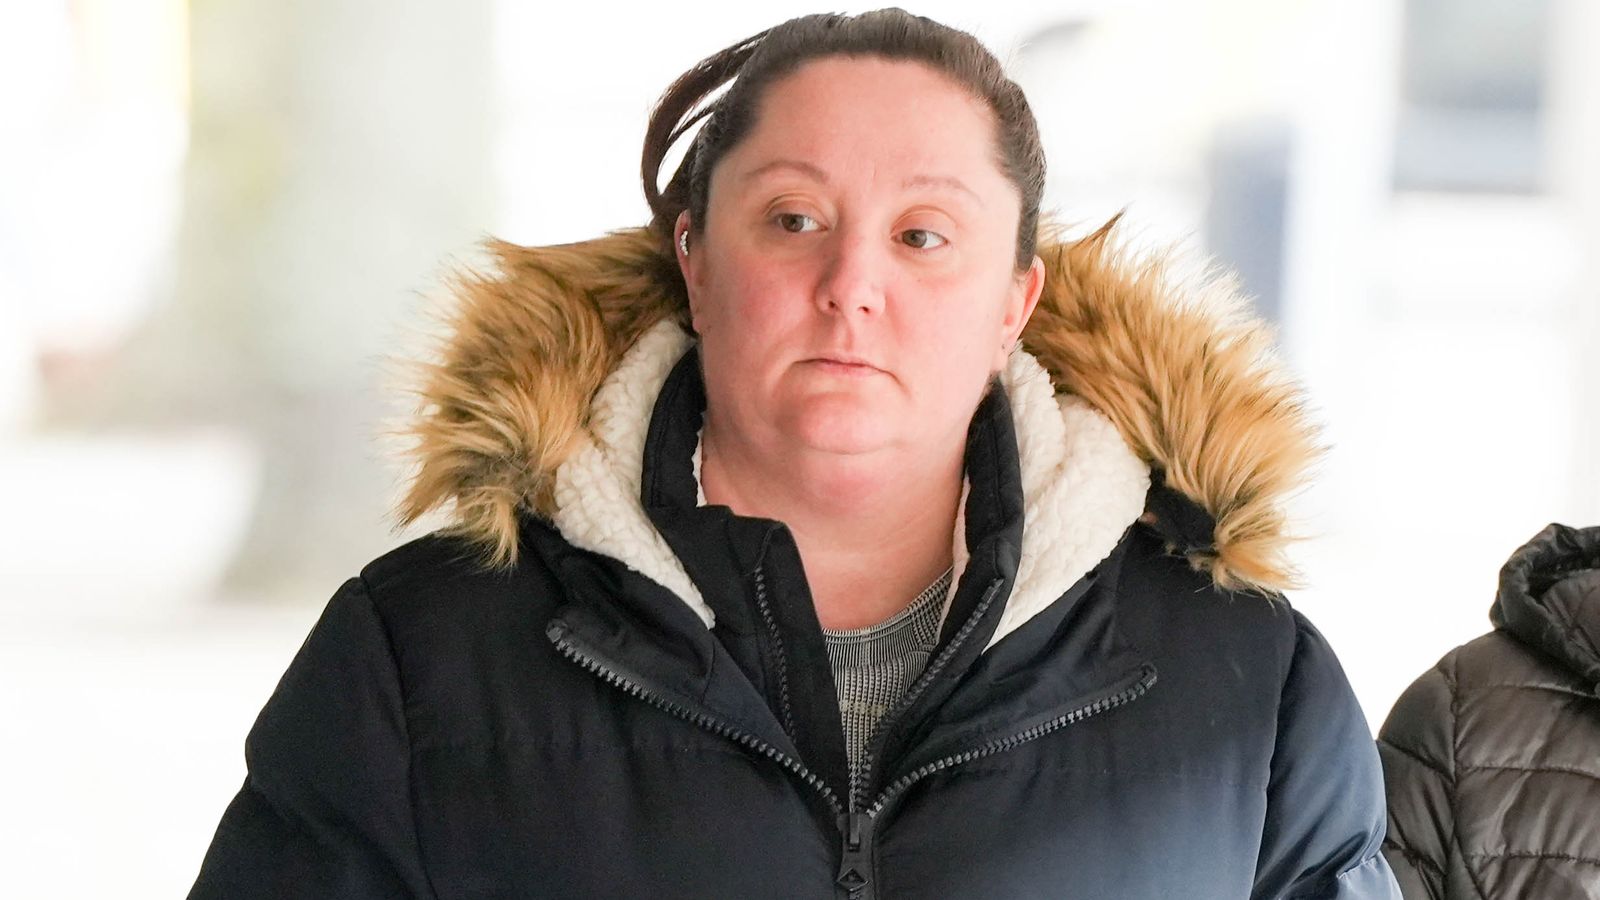 'I do not feel my actions caused baby's death', nursery worker tells court